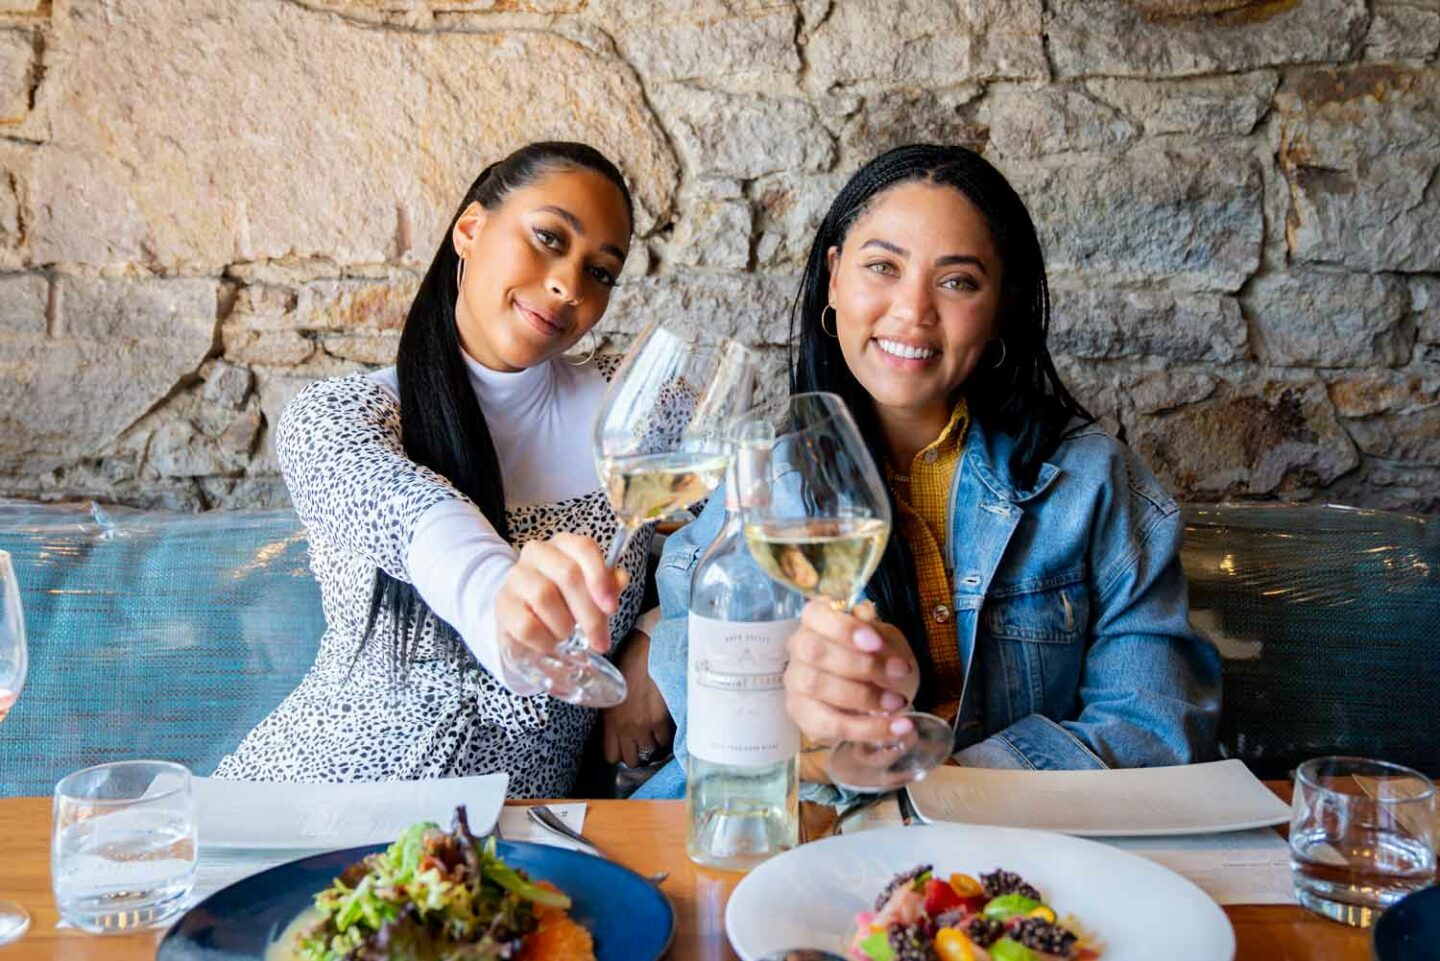 Ayesha and Sydel pose together, each holding classes of Domaine Curry Wine